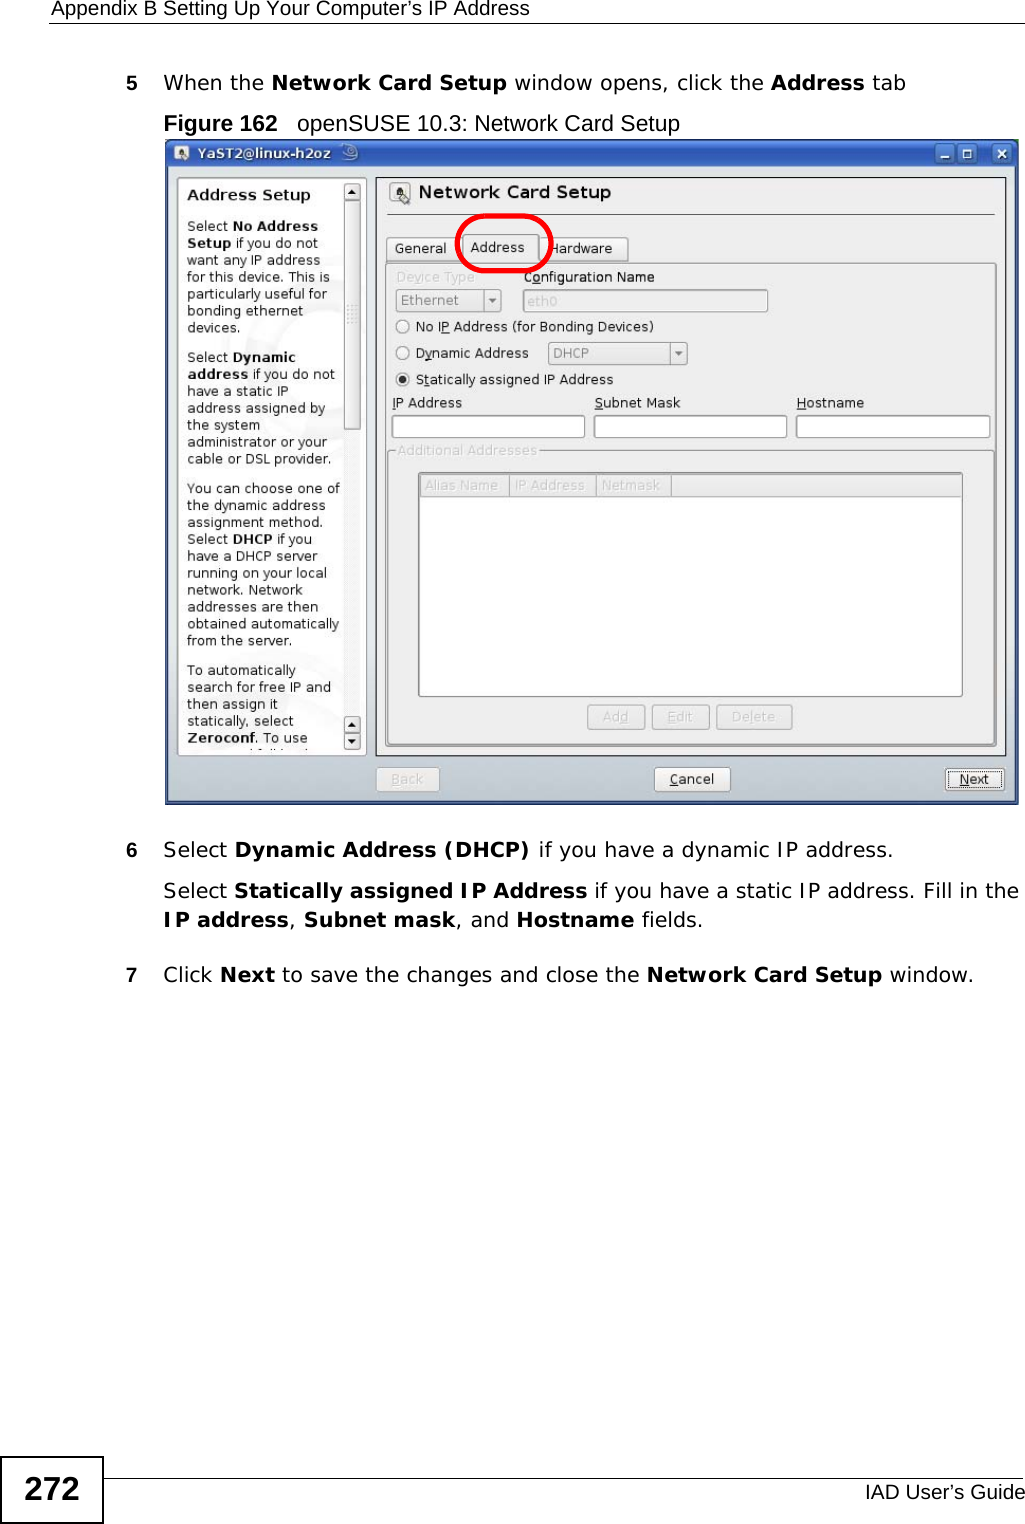 Appendix B Setting Up Your Computer’s IP AddressIAD User’s Guide2725When the Network Card Setup window opens, click the Address tabFigure 162   openSUSE 10.3: Network Card Setup6Select Dynamic Address (DHCP) if you have a dynamic IP address.Select Statically assigned IP Address if you have a static IP address. Fill in the IP address, Subnet mask, and Hostname fields.7Click Next to save the changes and close the Network Card Setup window. 